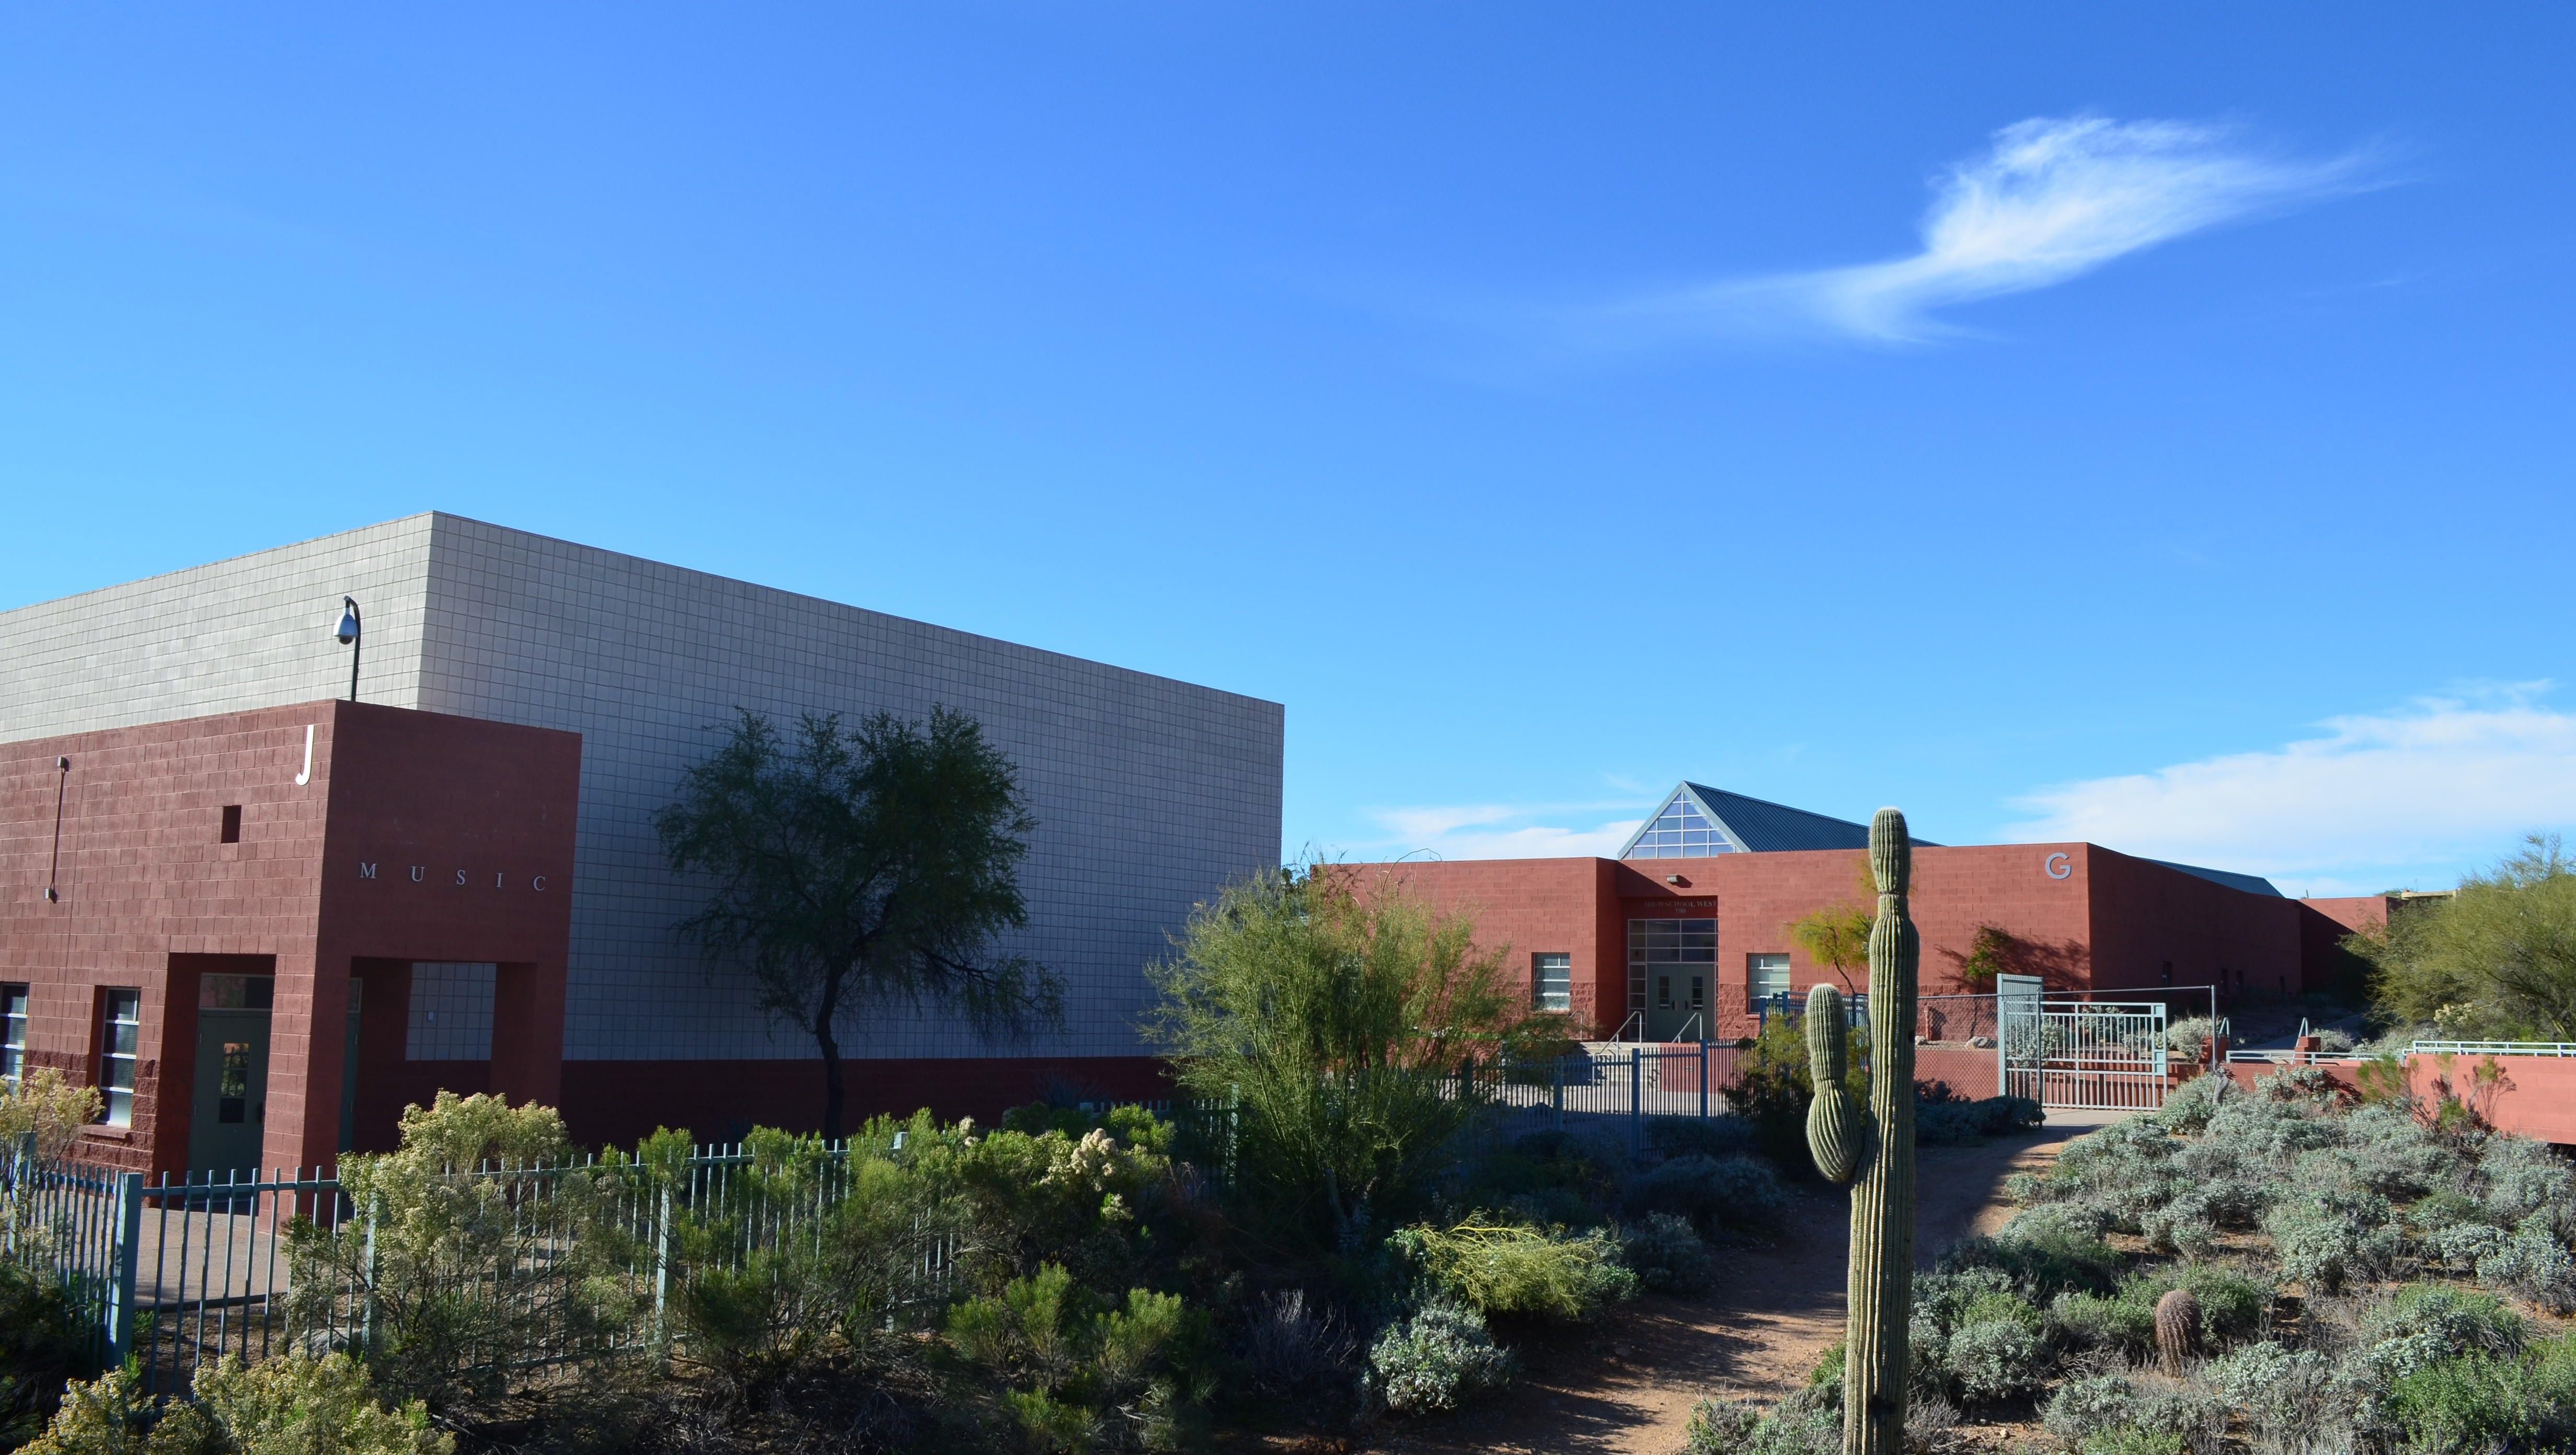 Fountain Hills High School, built in 1991, sits next to Golden Eagle Park, a 25-acre active recreation area.